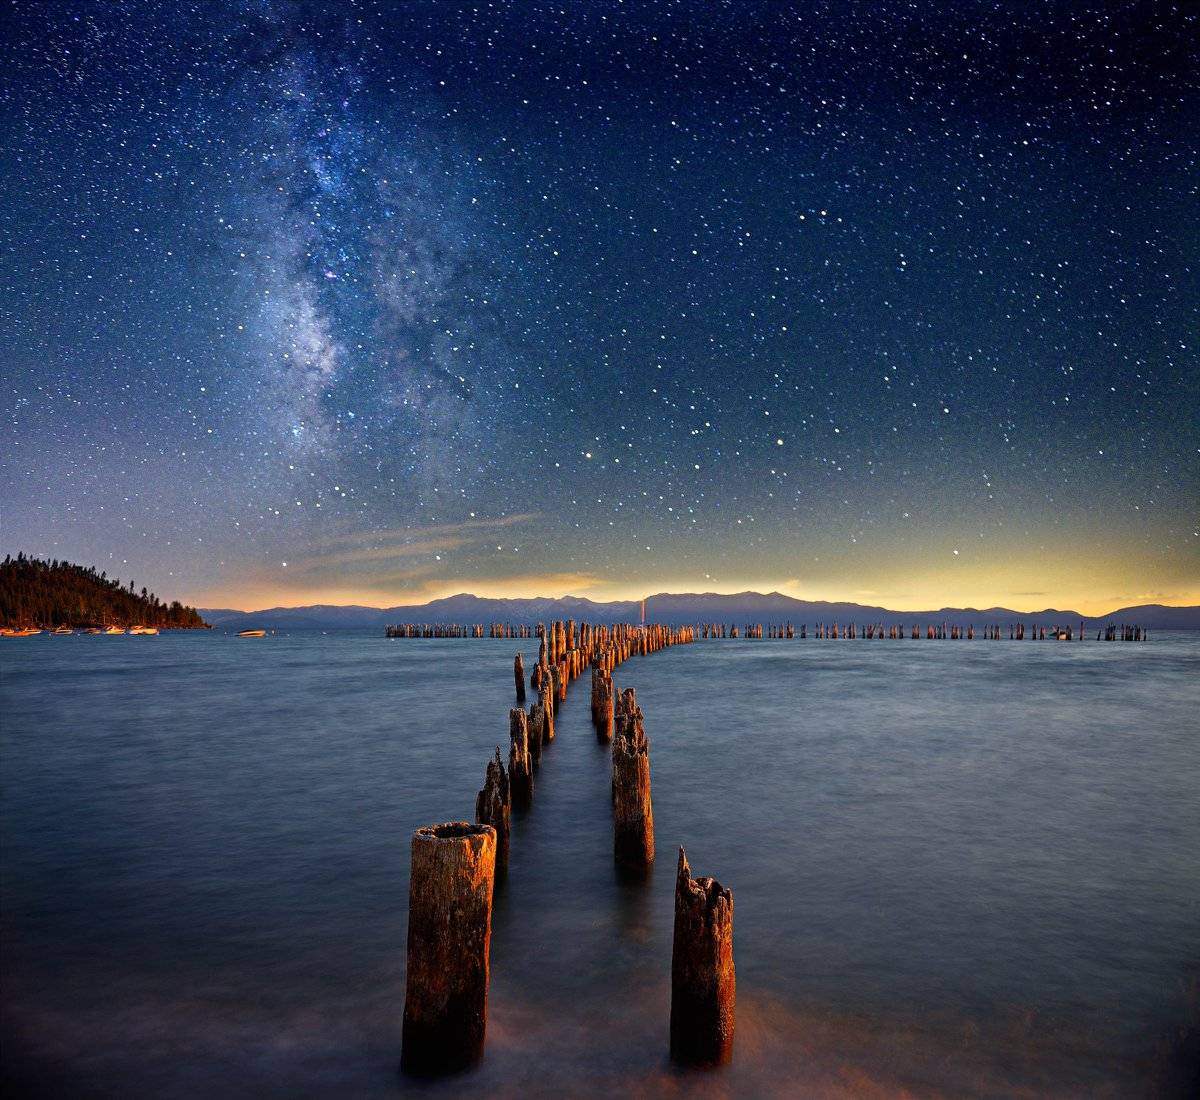 Sunset to light the old pier, and Milky Way at Lake Tahoe by David Shield @DShieldPhoto